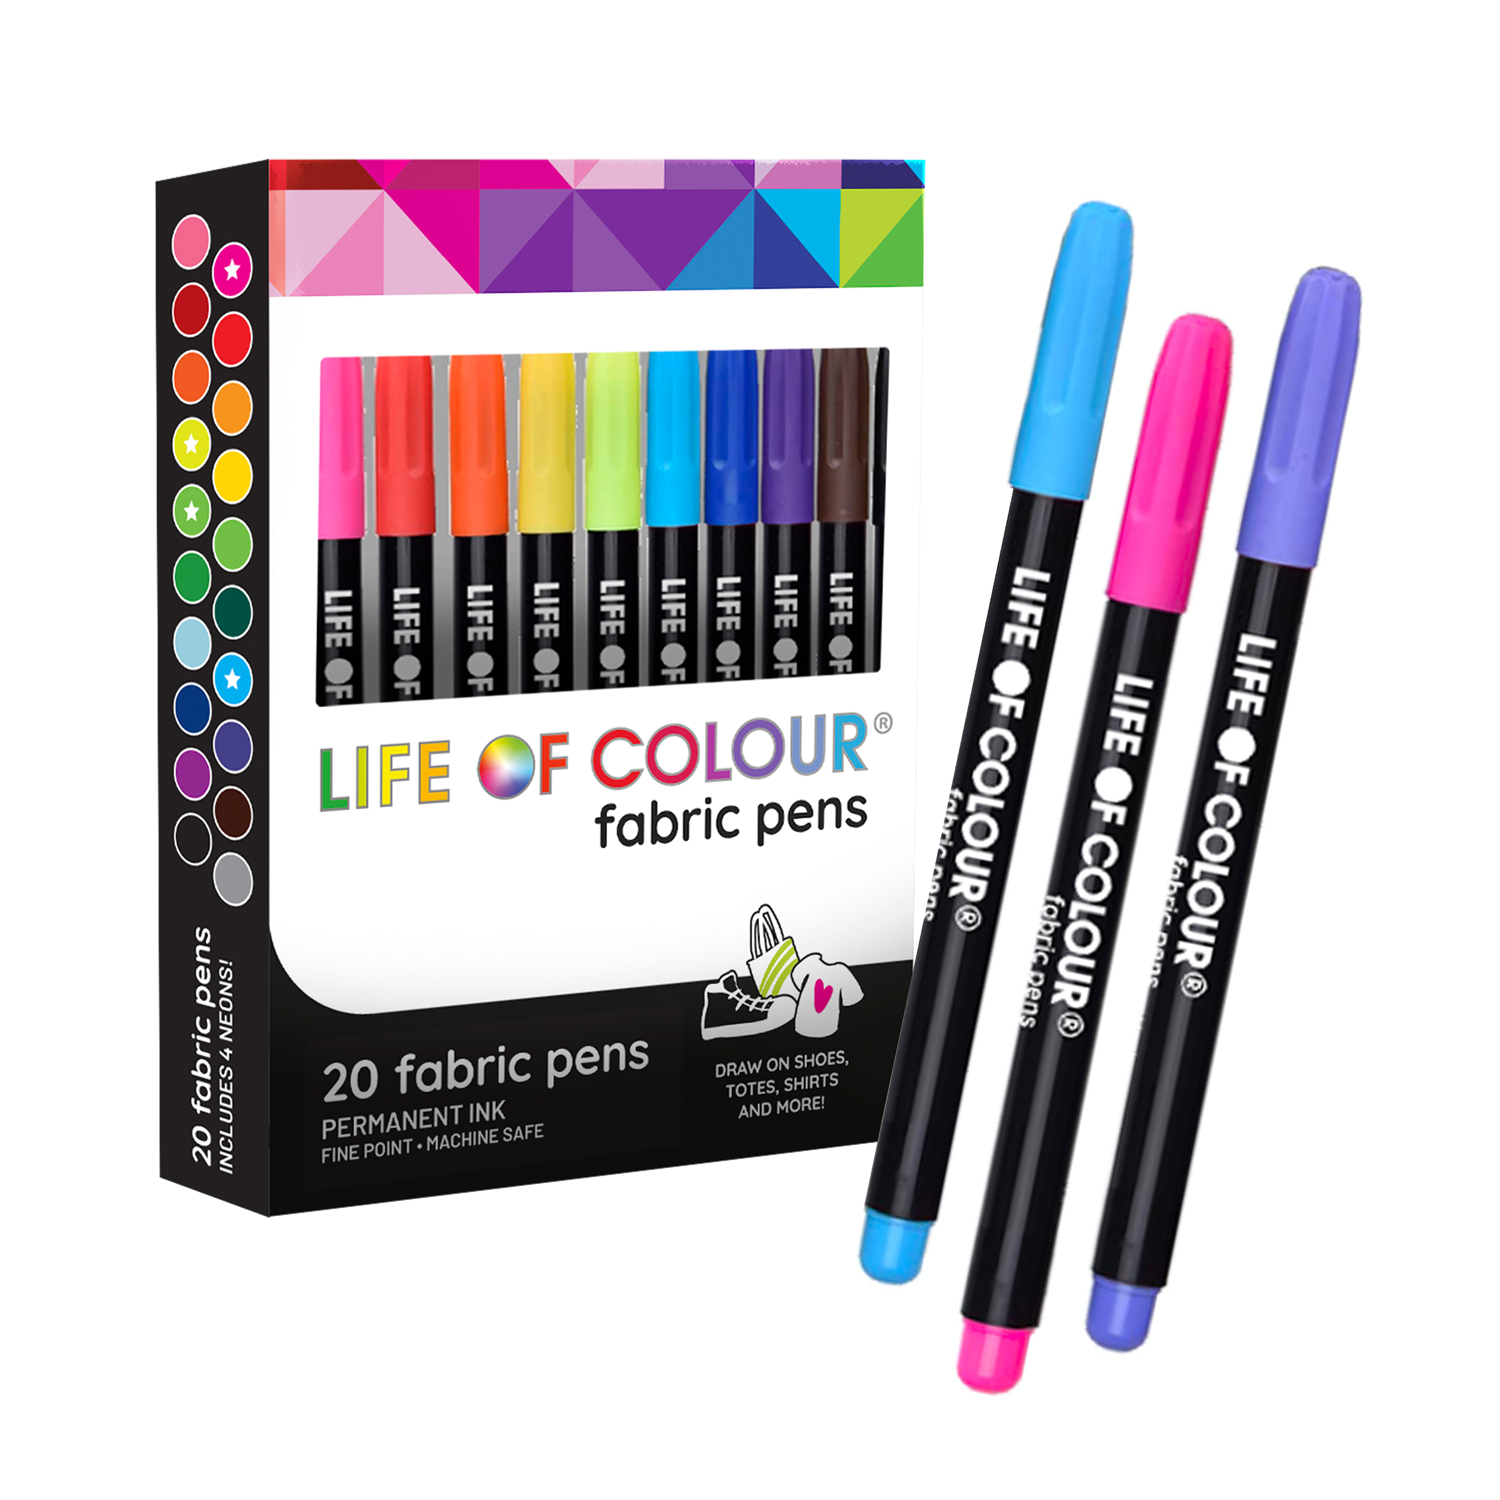  Zenacolor 24 Dual Tip Acrylic Paint Markers for Wood, Canvas,  Stone - Crafts, DIY Projects : Arts, Crafts & Sewing